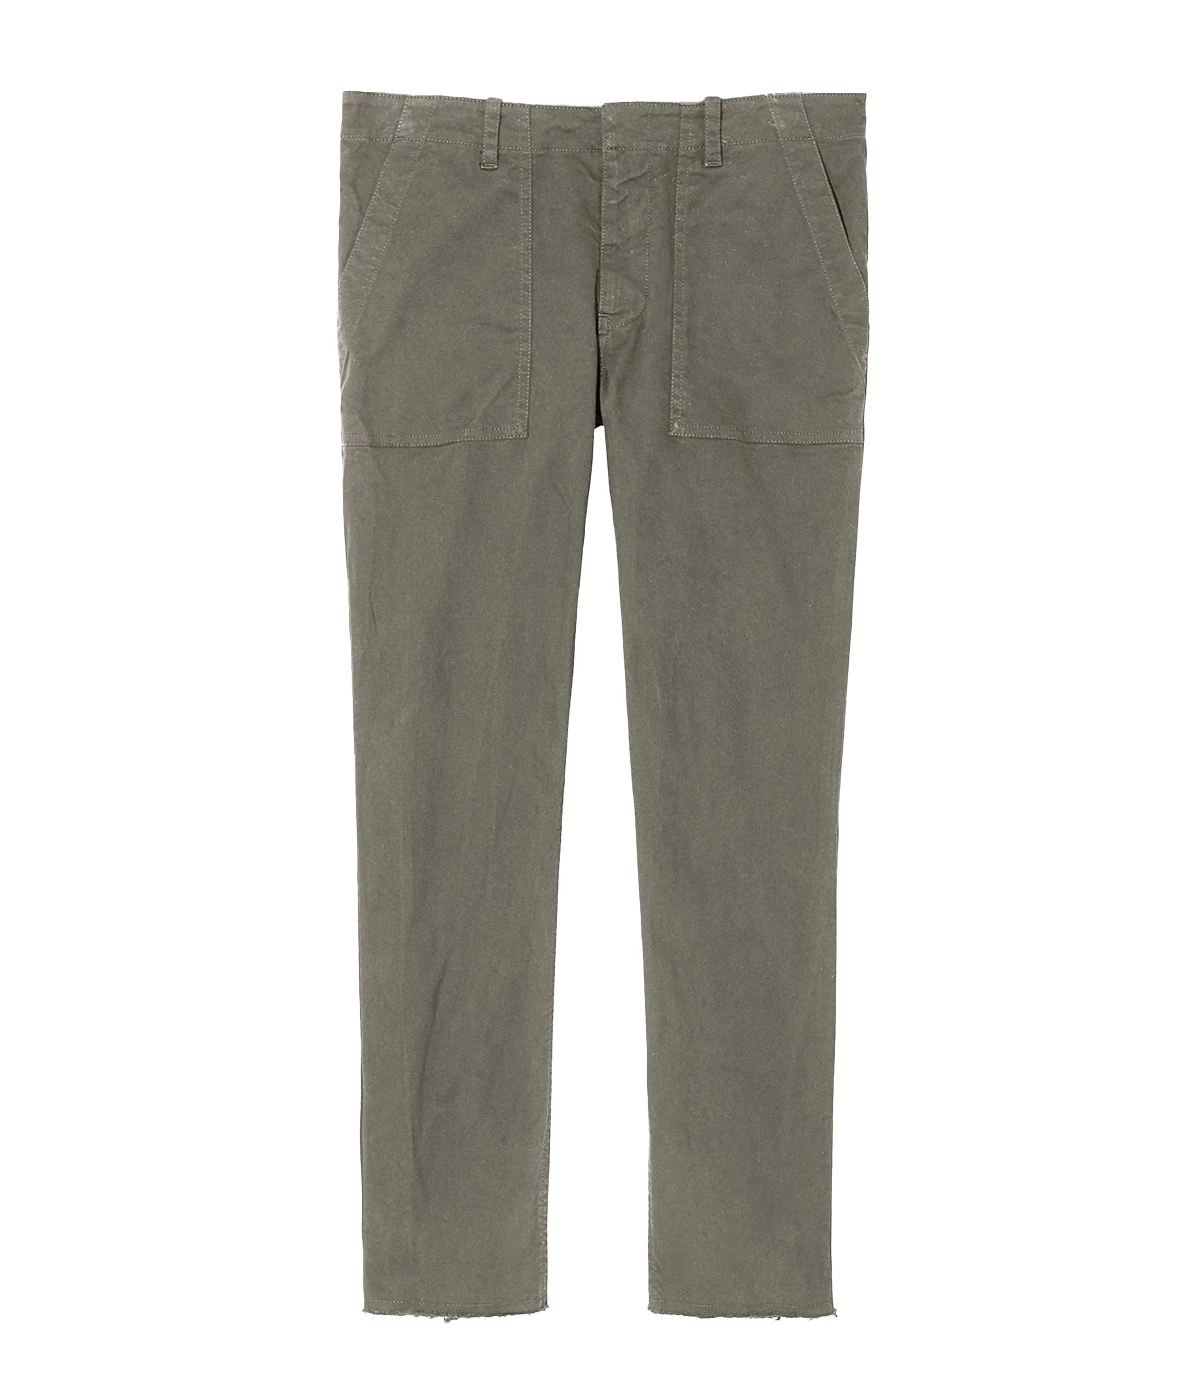 Jenna Pant in Admiral Green